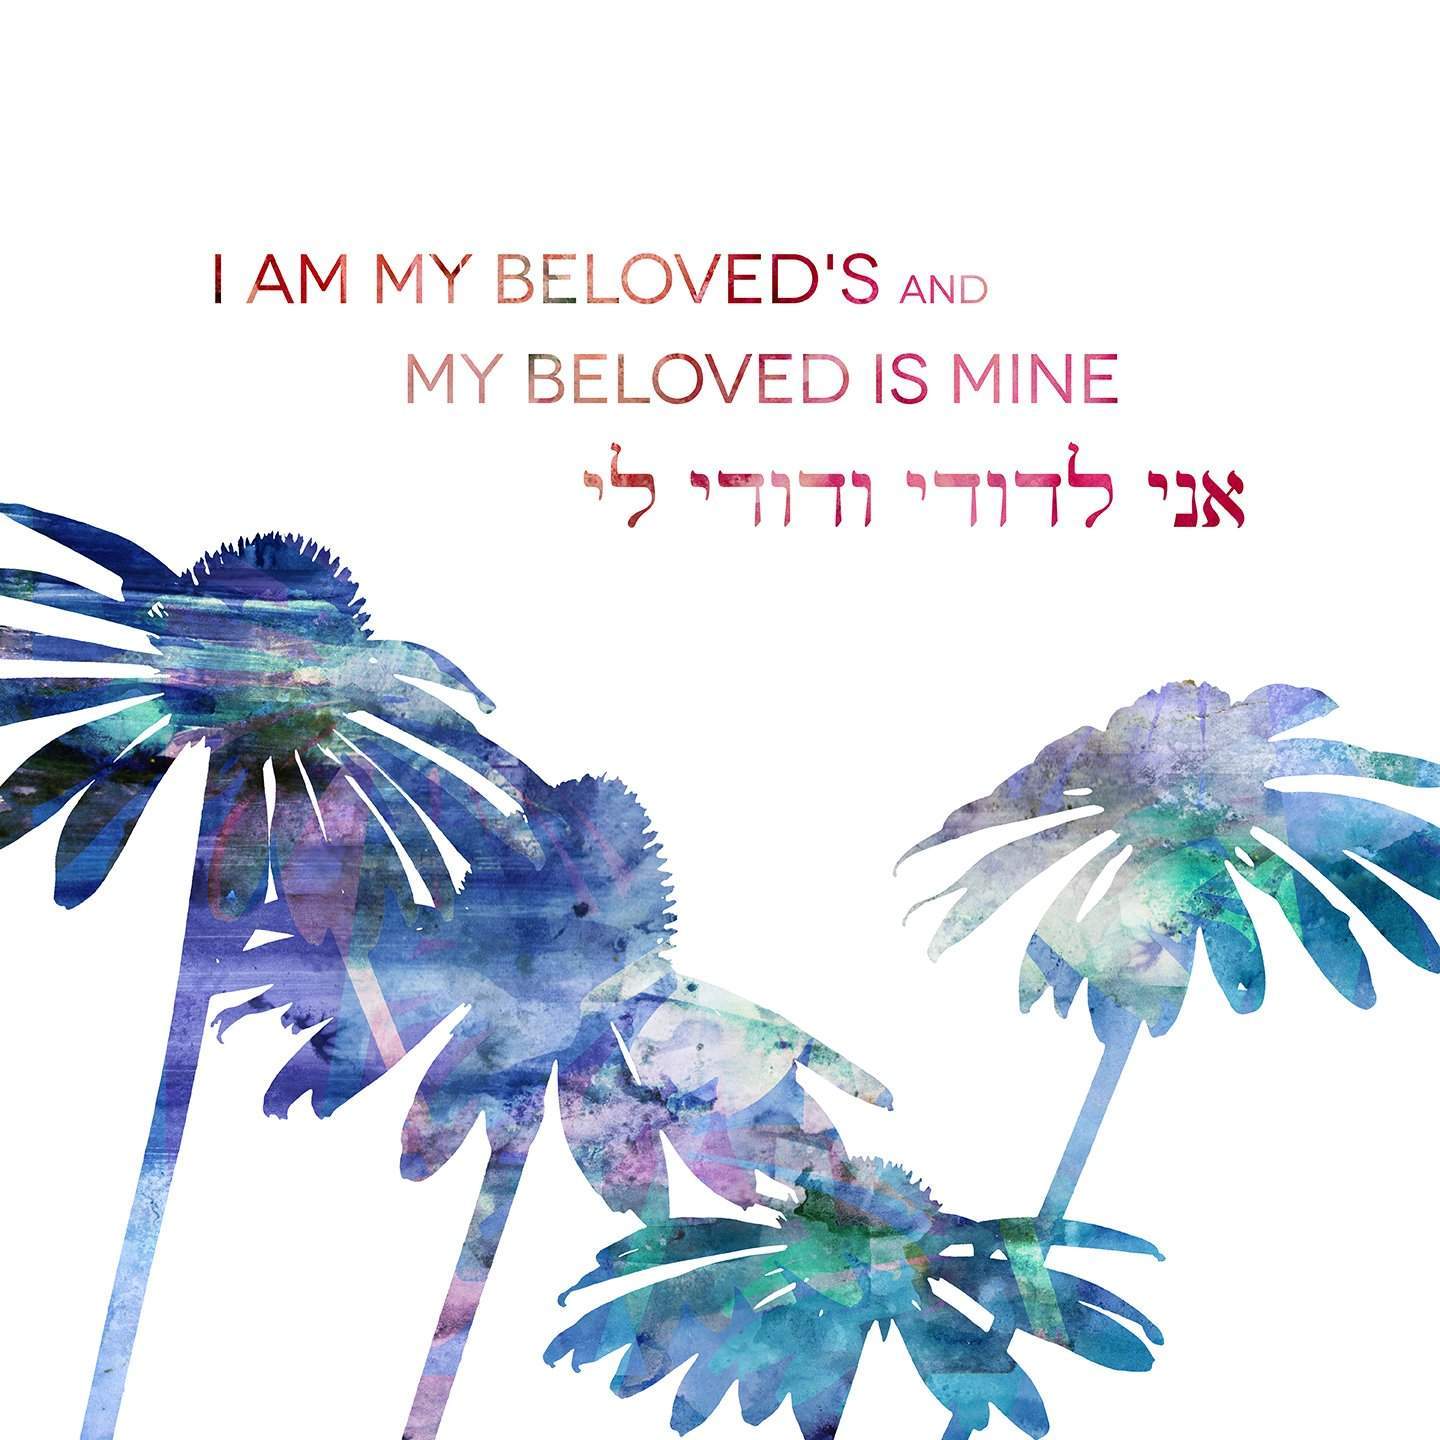 Personalized Jewish Wedding Gift: I am my beloved's and my beloved is mine